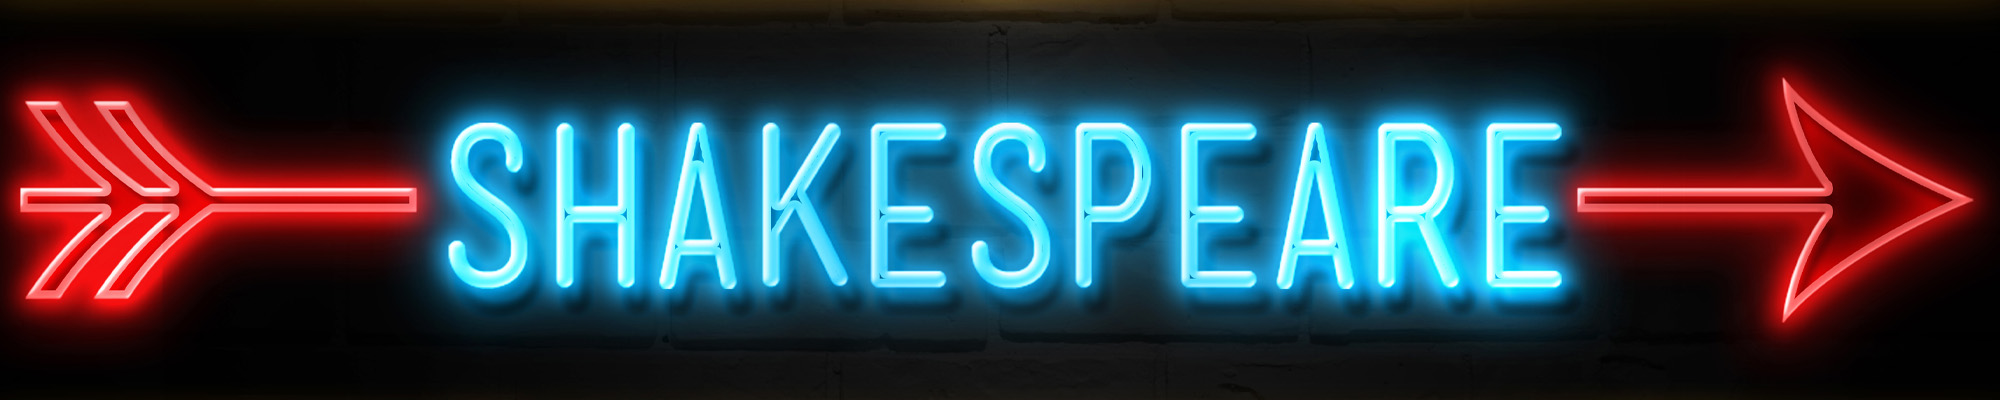 neon sign that says Shakespeare